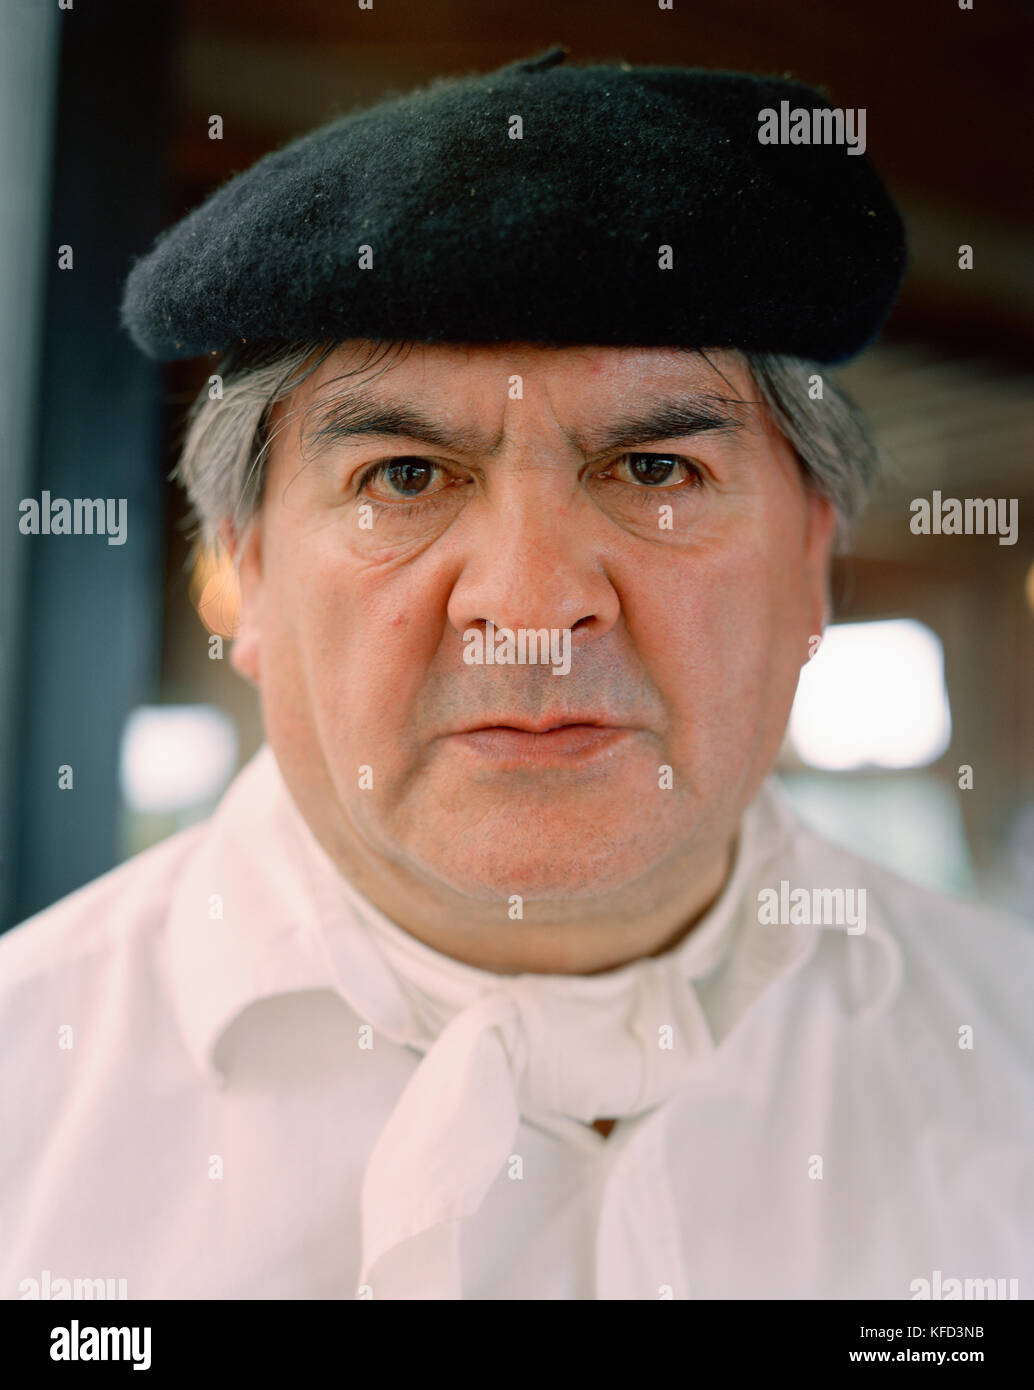 ARGENTINA, Patagonia, portrait of a chef at Llao Llao Hotel Stock Photo